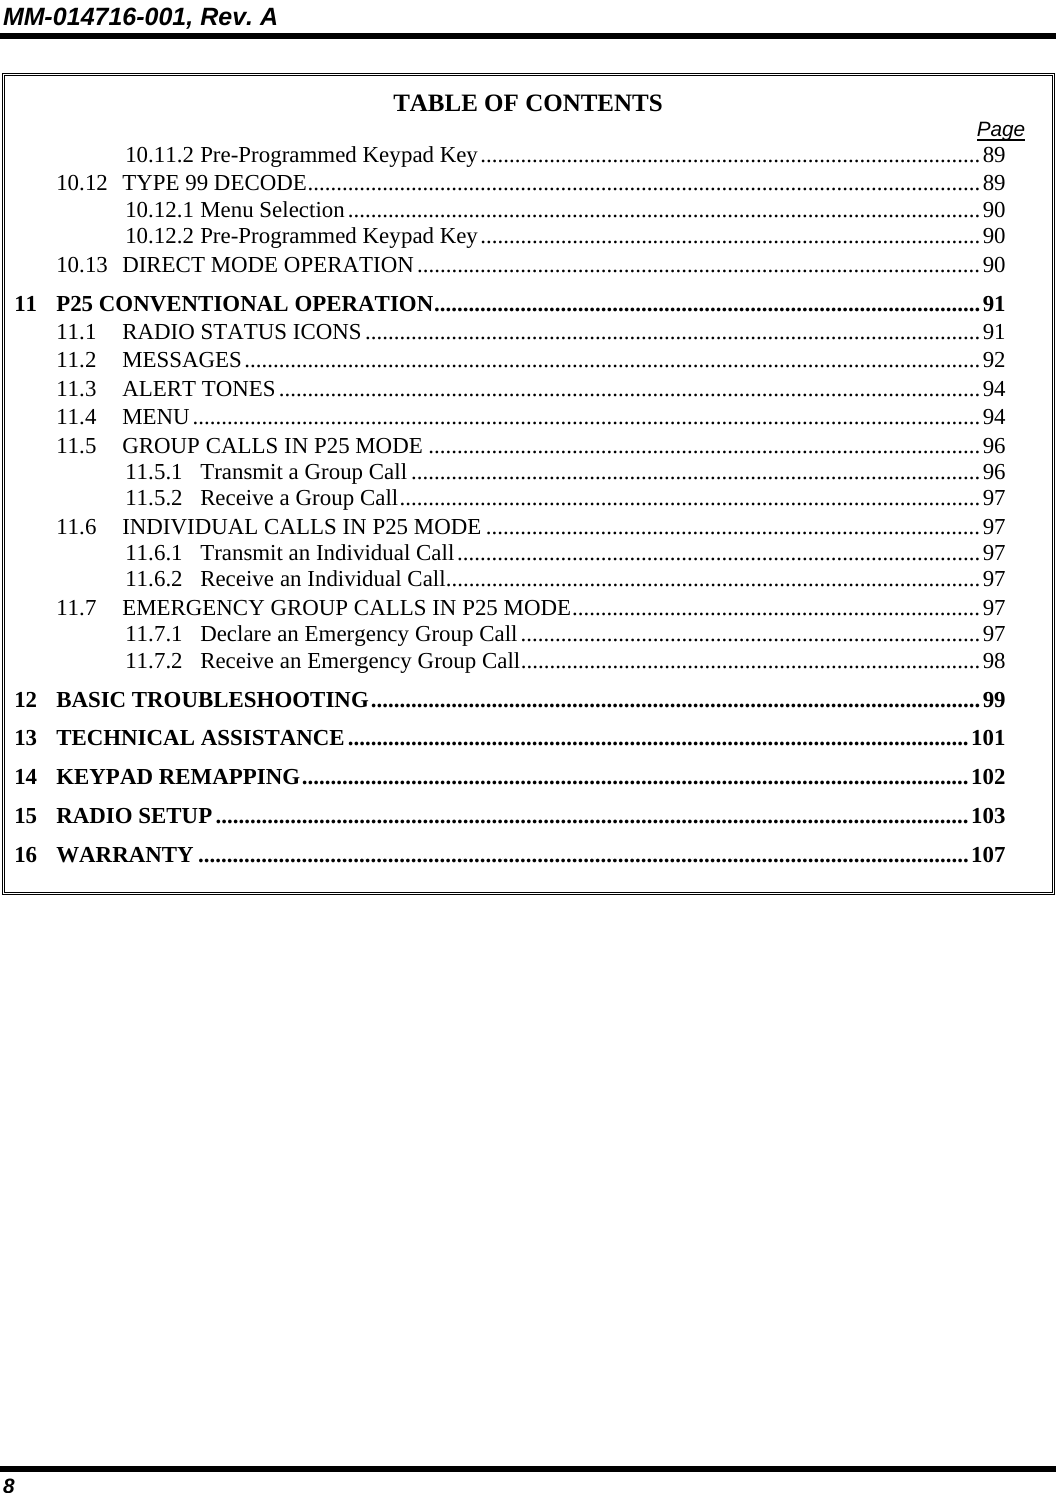 MM-014716-001, Rev. A 8 TABLE OF CONTENTS  Page 10.11.2 Pre-Programmed Keypad Key.......................................................................................89 10.12 TYPE 99 DECODE.....................................................................................................................89 10.12.1 Menu Selection..............................................................................................................90 10.12.2 Pre-Programmed Keypad Key.......................................................................................90 10.13 DIRECT MODE OPERATION..................................................................................................90 11 P25 CONVENTIONAL OPERATION...............................................................................................91 11.1 RADIO STATUS ICONS...........................................................................................................91 11.2 MESSAGES................................................................................................................................92 11.3 ALERT TONES..........................................................................................................................94 11.4 MENU.........................................................................................................................................94 11.5 GROUP CALLS IN P25 MODE ................................................................................................96 11.5.1 Transmit a Group Call...................................................................................................96 11.5.2 Receive a Group Call.....................................................................................................97 11.6 INDIVIDUAL CALLS IN P25 MODE ......................................................................................97 11.6.1 Transmit an Individual Call...........................................................................................97 11.6.2 Receive an Individual Call.............................................................................................97 11.7 EMERGENCY GROUP CALLS IN P25 MODE.......................................................................97 11.7.1 Declare an Emergency Group Call................................................................................97 11.7.2 Receive an Emergency Group Call................................................................................98 12 BASIC TROUBLESHOOTING..........................................................................................................99 13 TECHNICAL ASSISTANCE............................................................................................................101 14 KEYPAD REMAPPING....................................................................................................................102 15 RADIO SETUP...................................................................................................................................103 16 WARRANTY ......................................................................................................................................107  